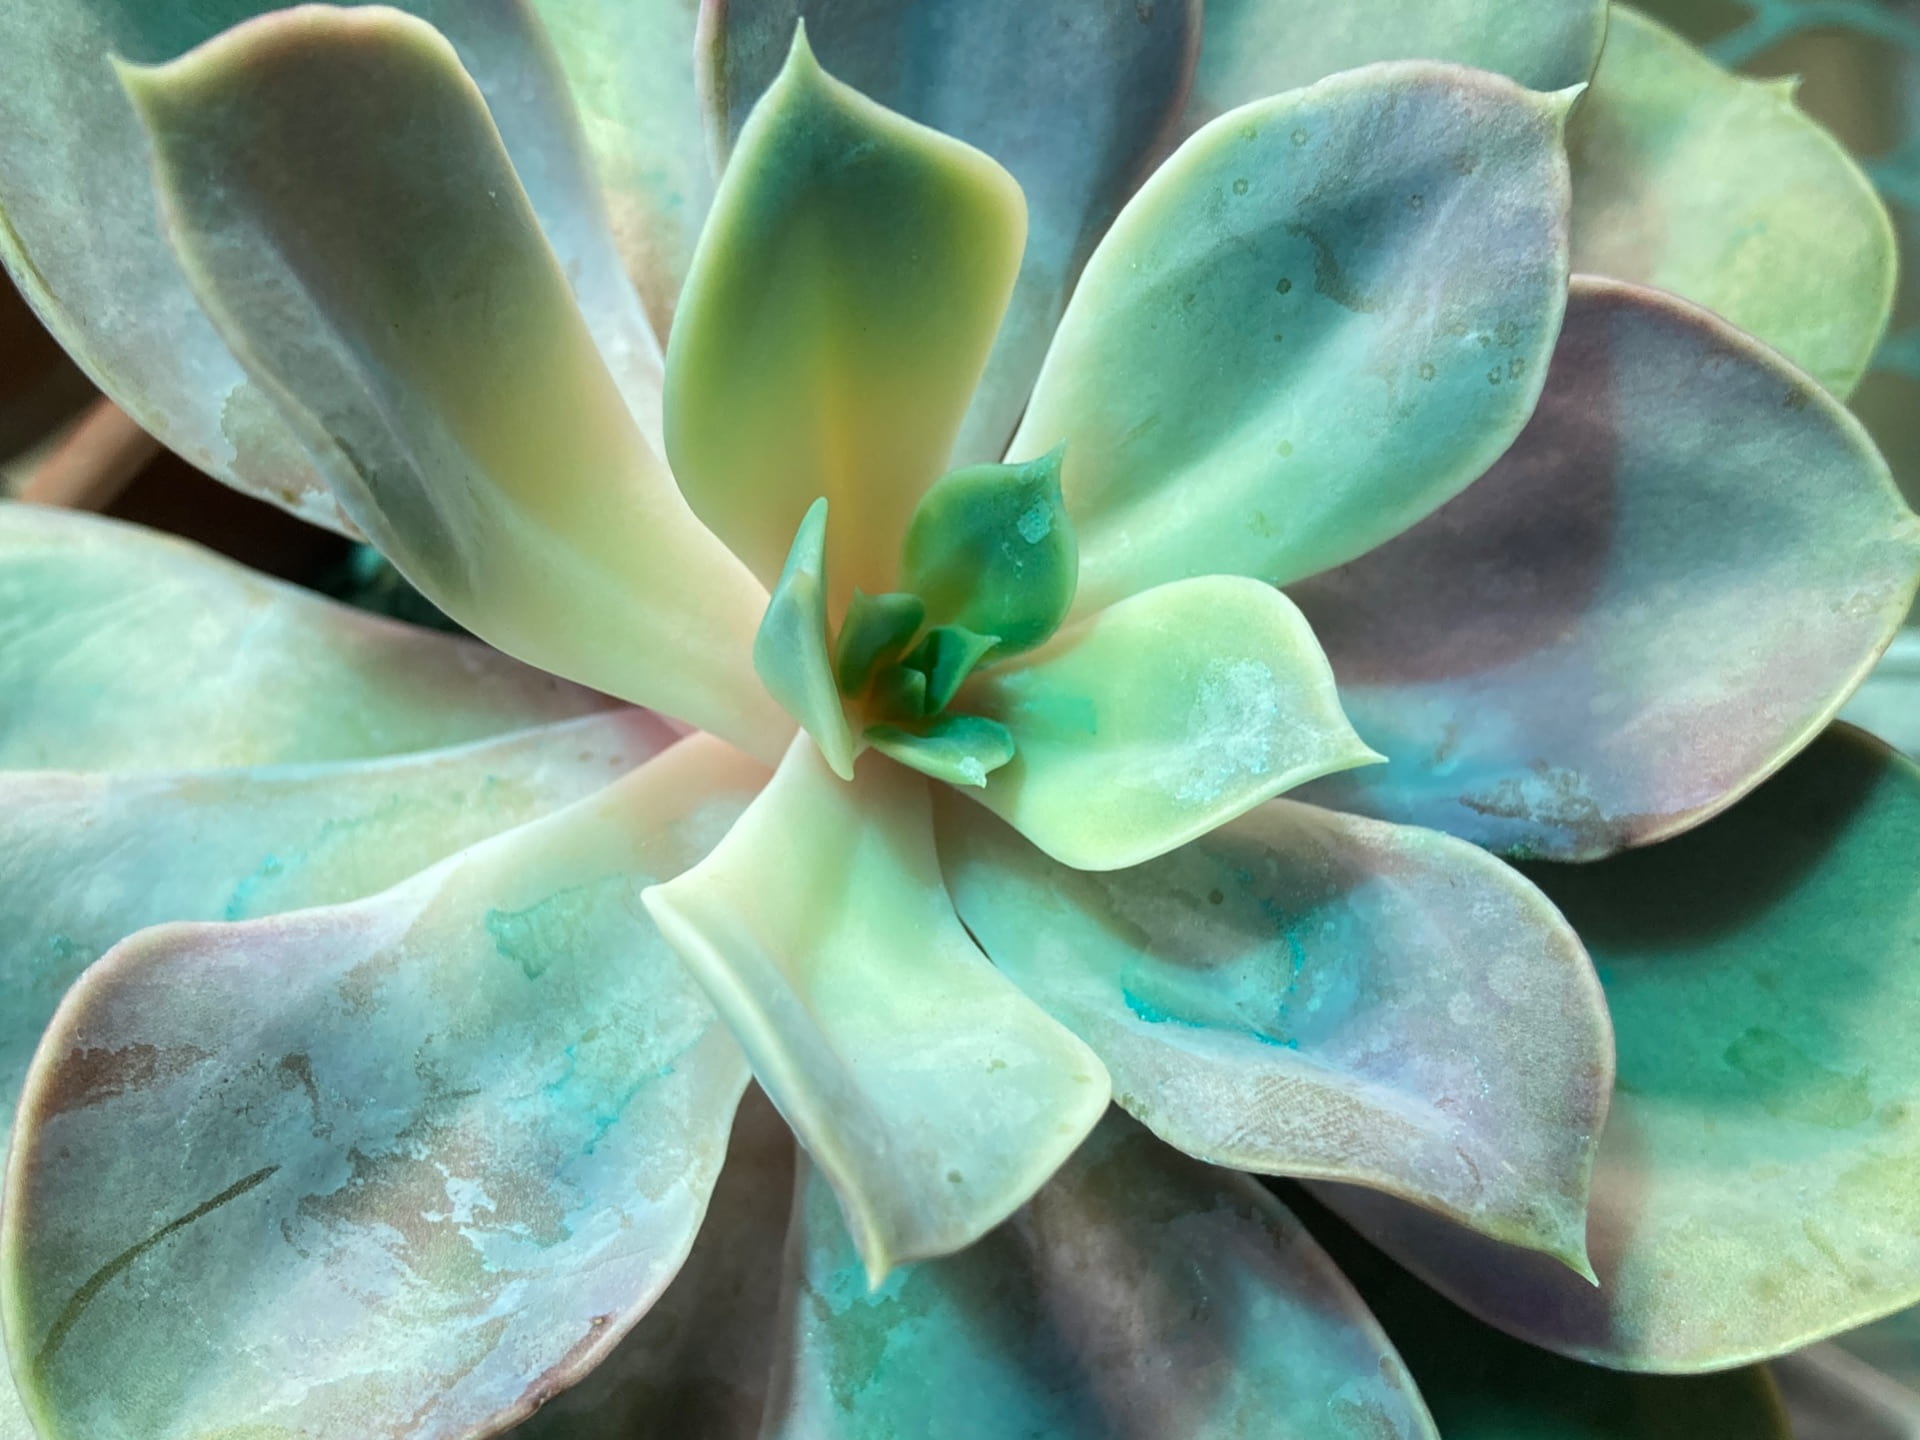 Glaucous waxy leaf coatings, as seen on this Echeveria sp., reflects ultraviolet light, to slow desiccation and preserve water.